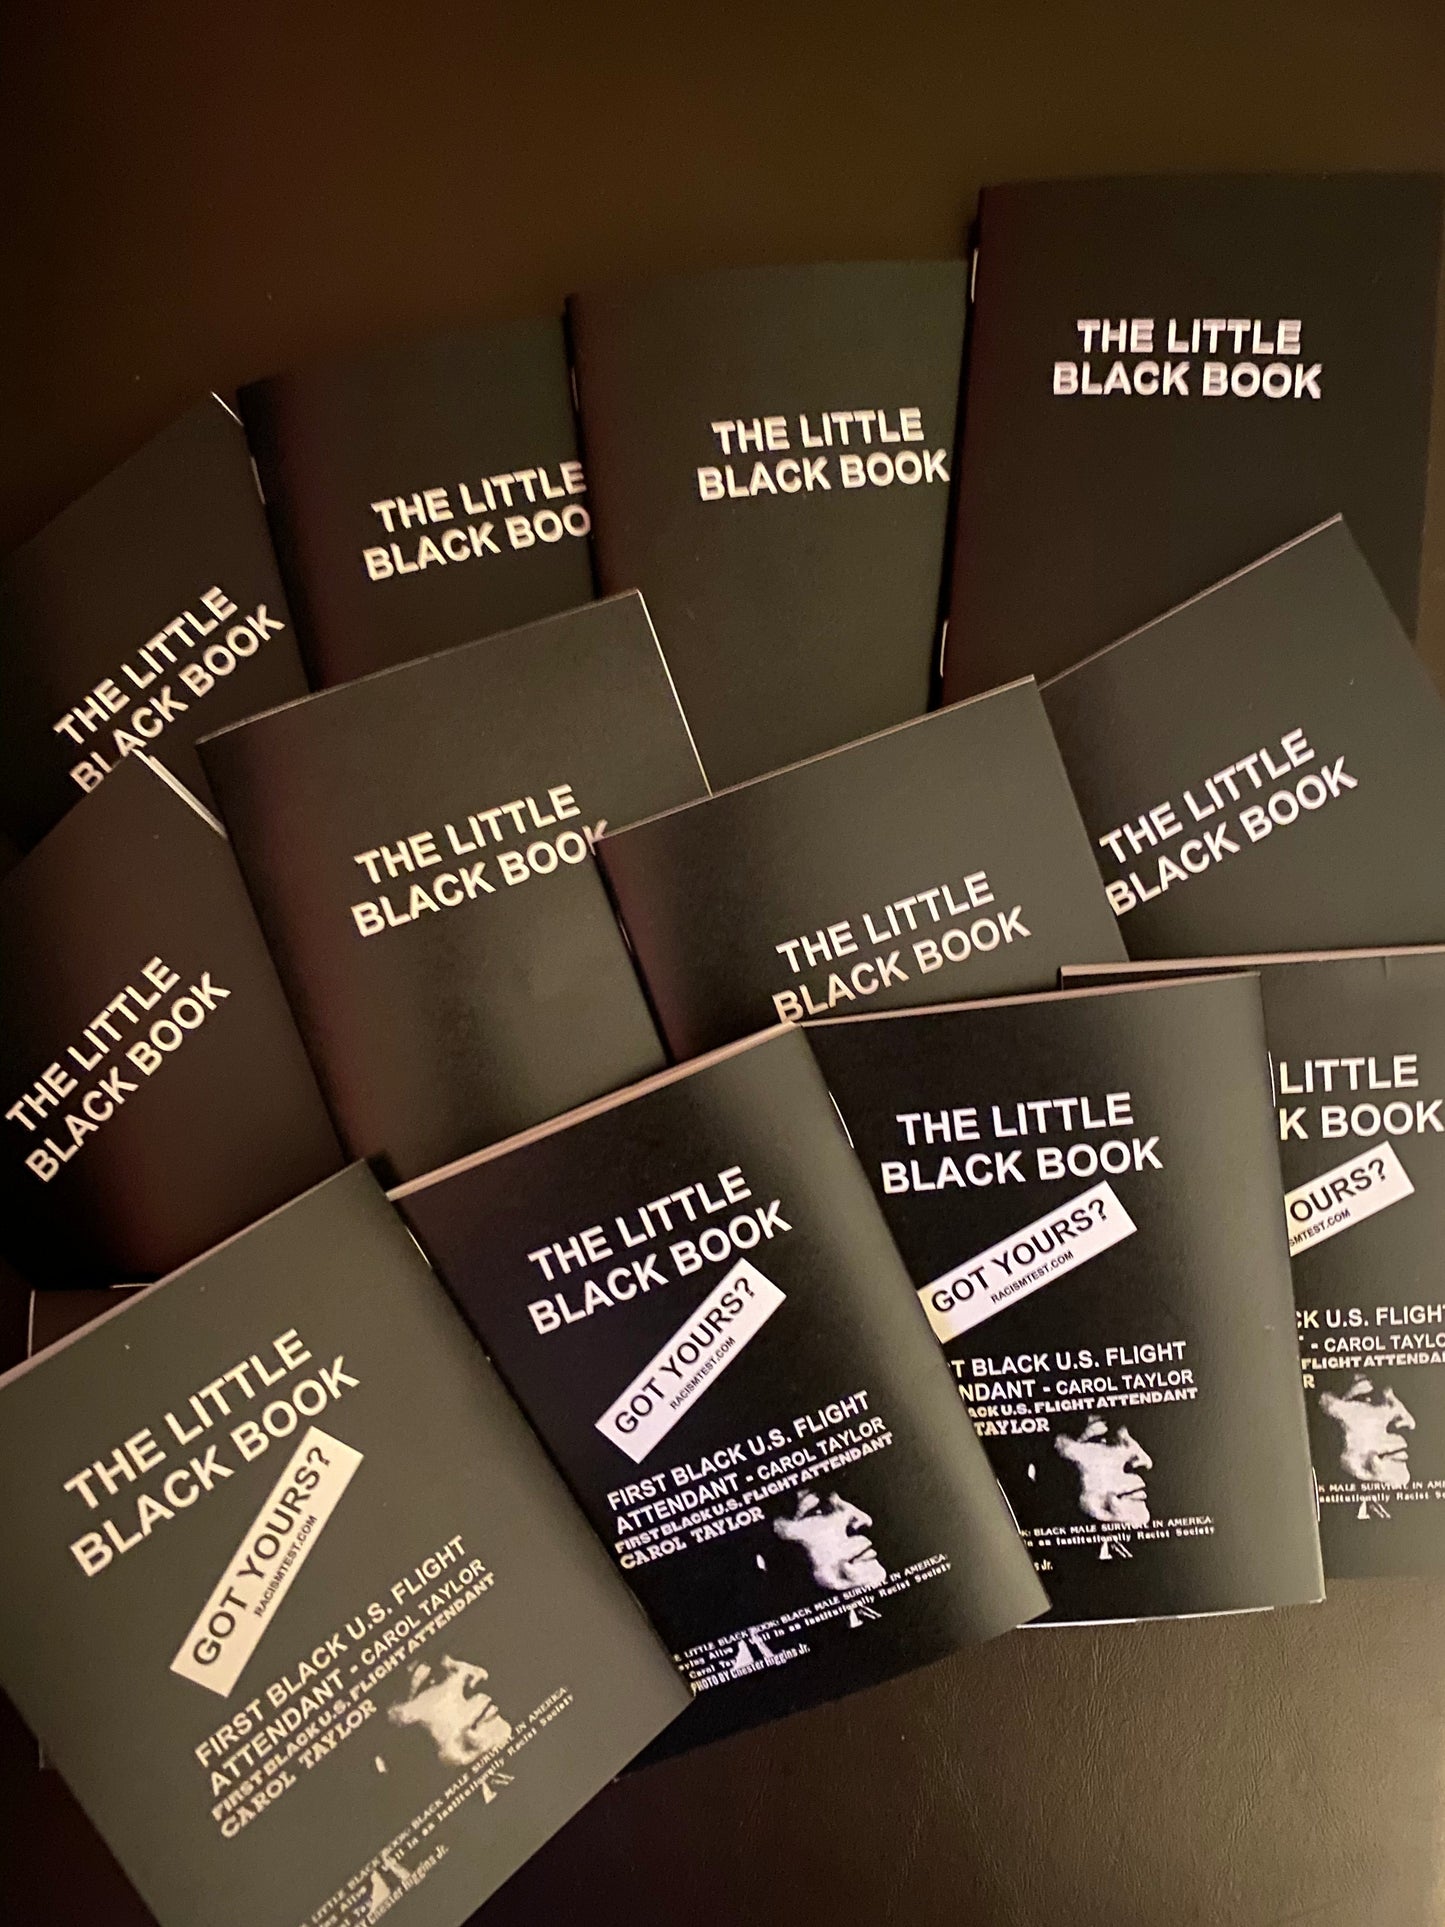 The Little Black Book - Black Survival Guide - Published in 1985 - By Carol Taylor